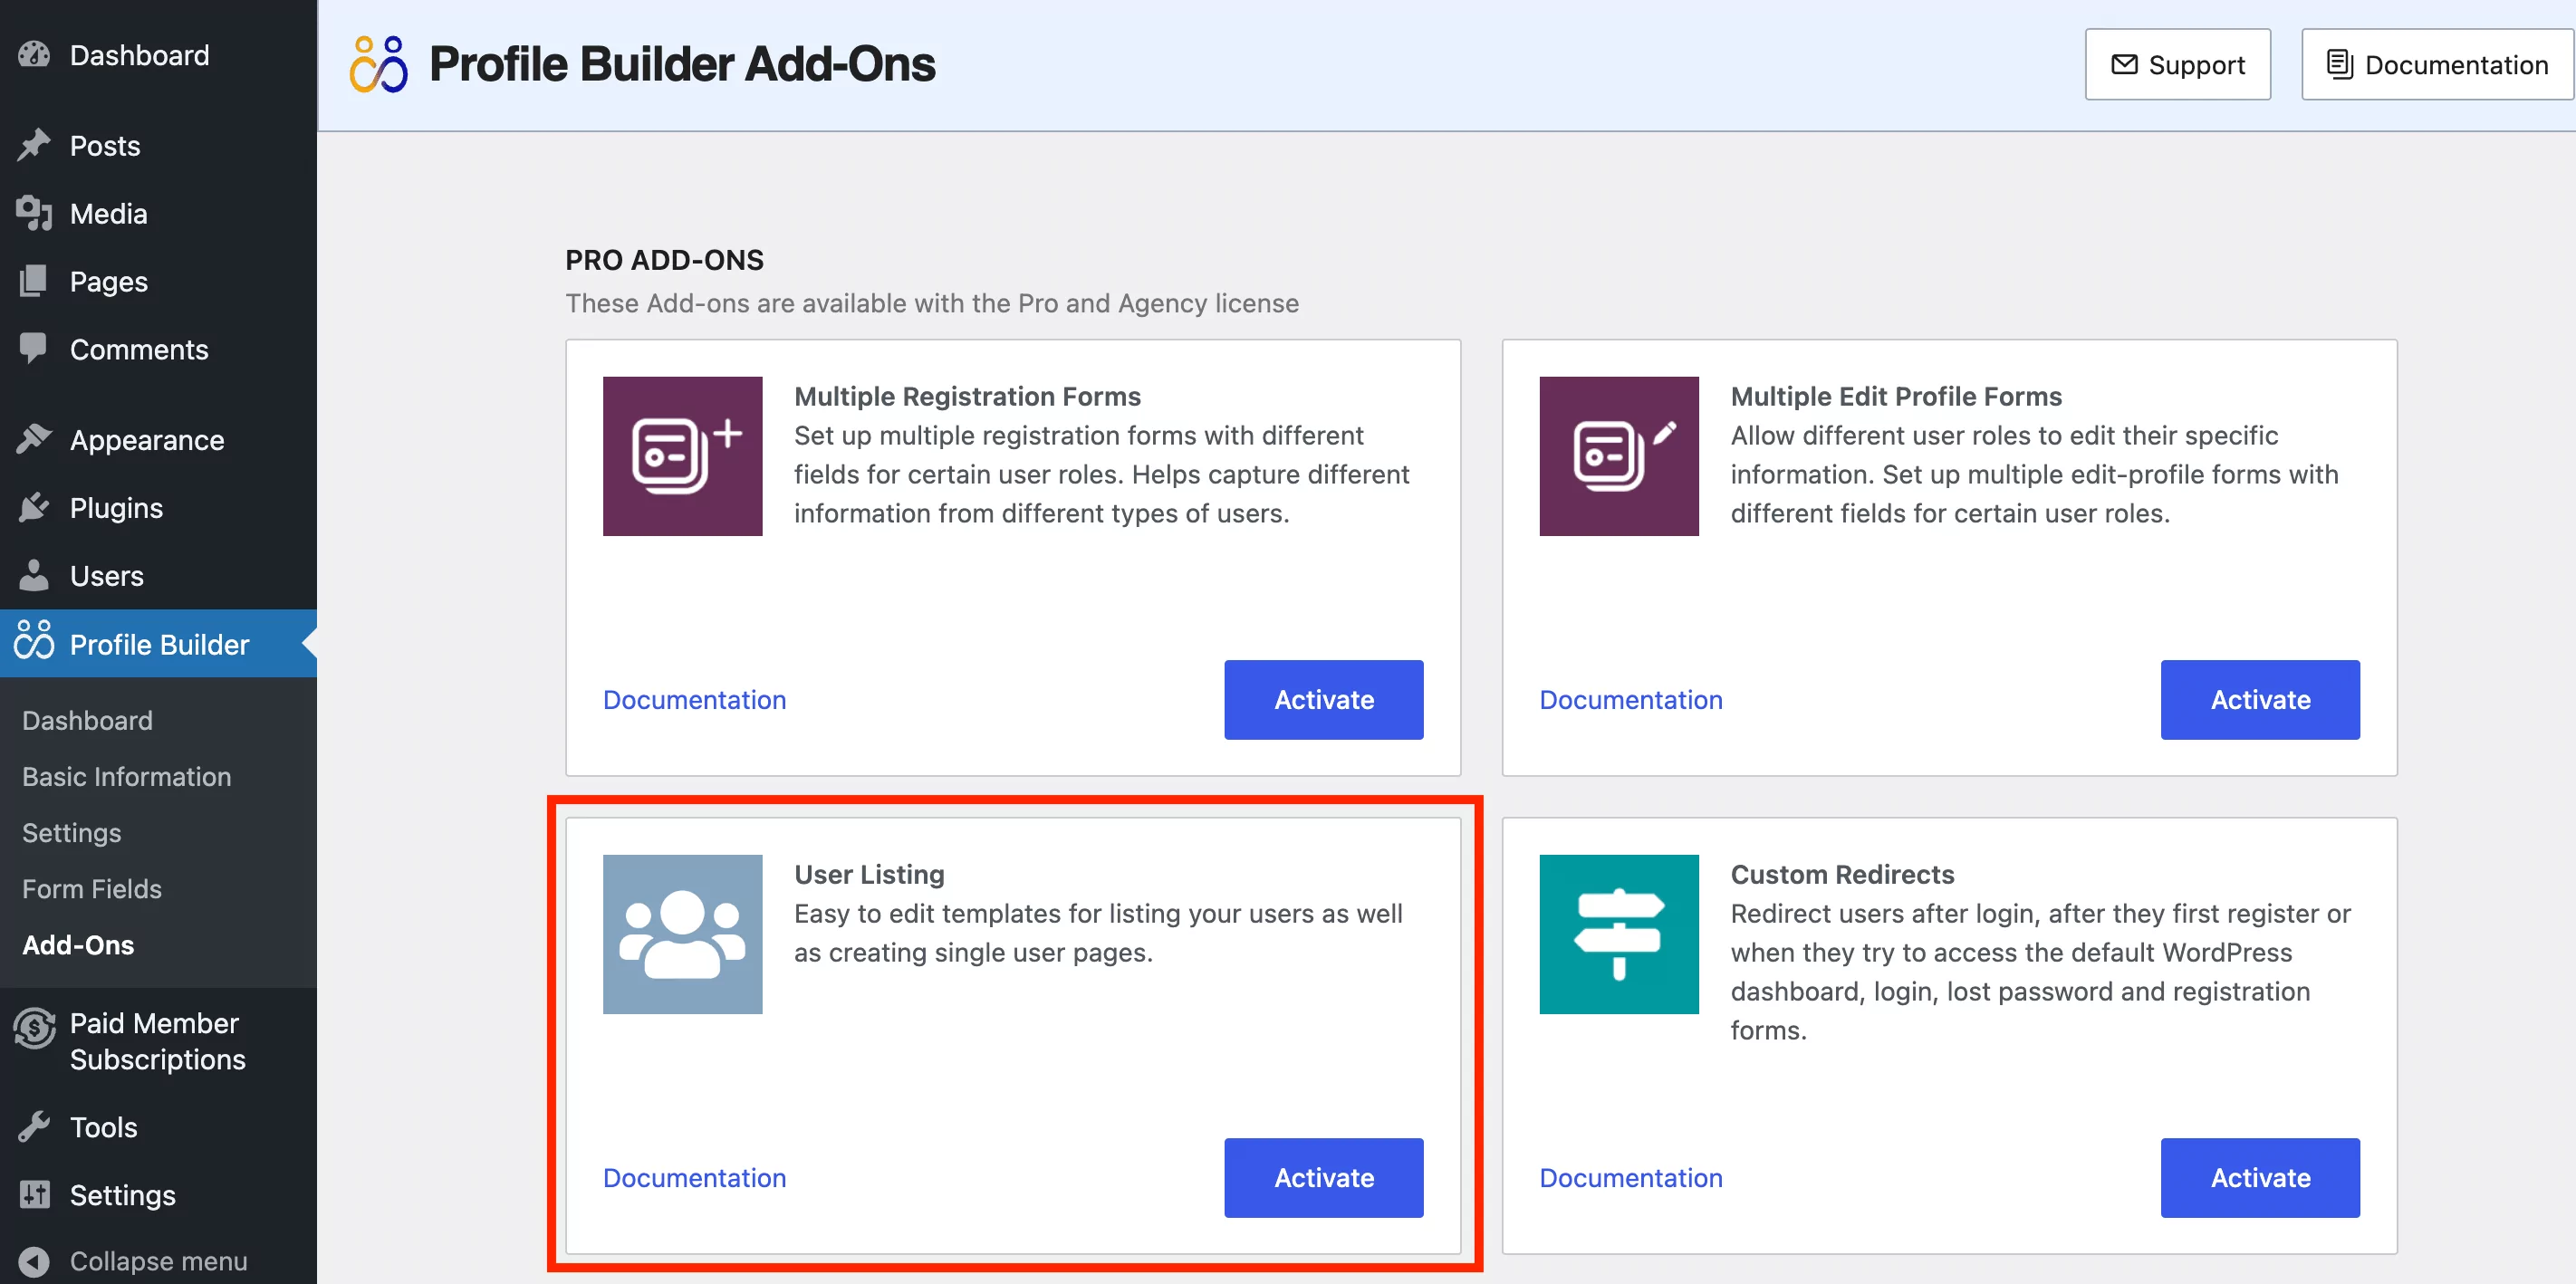 Activating the User Listing add-on in Profile Builder Pro